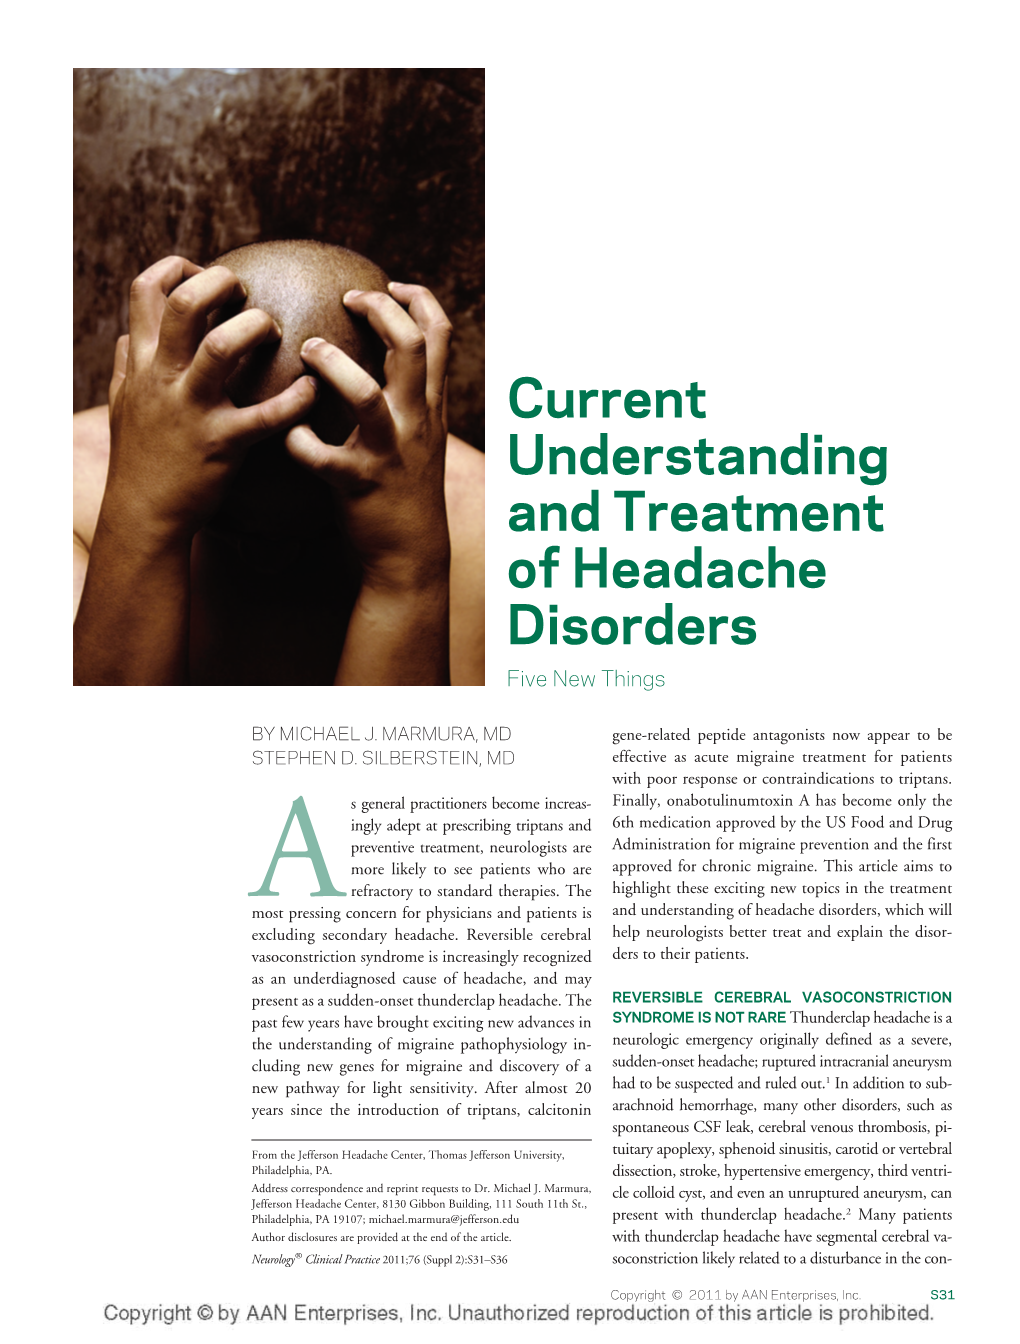 Current Understanding and Treatment of Headache Disorders Five New Things